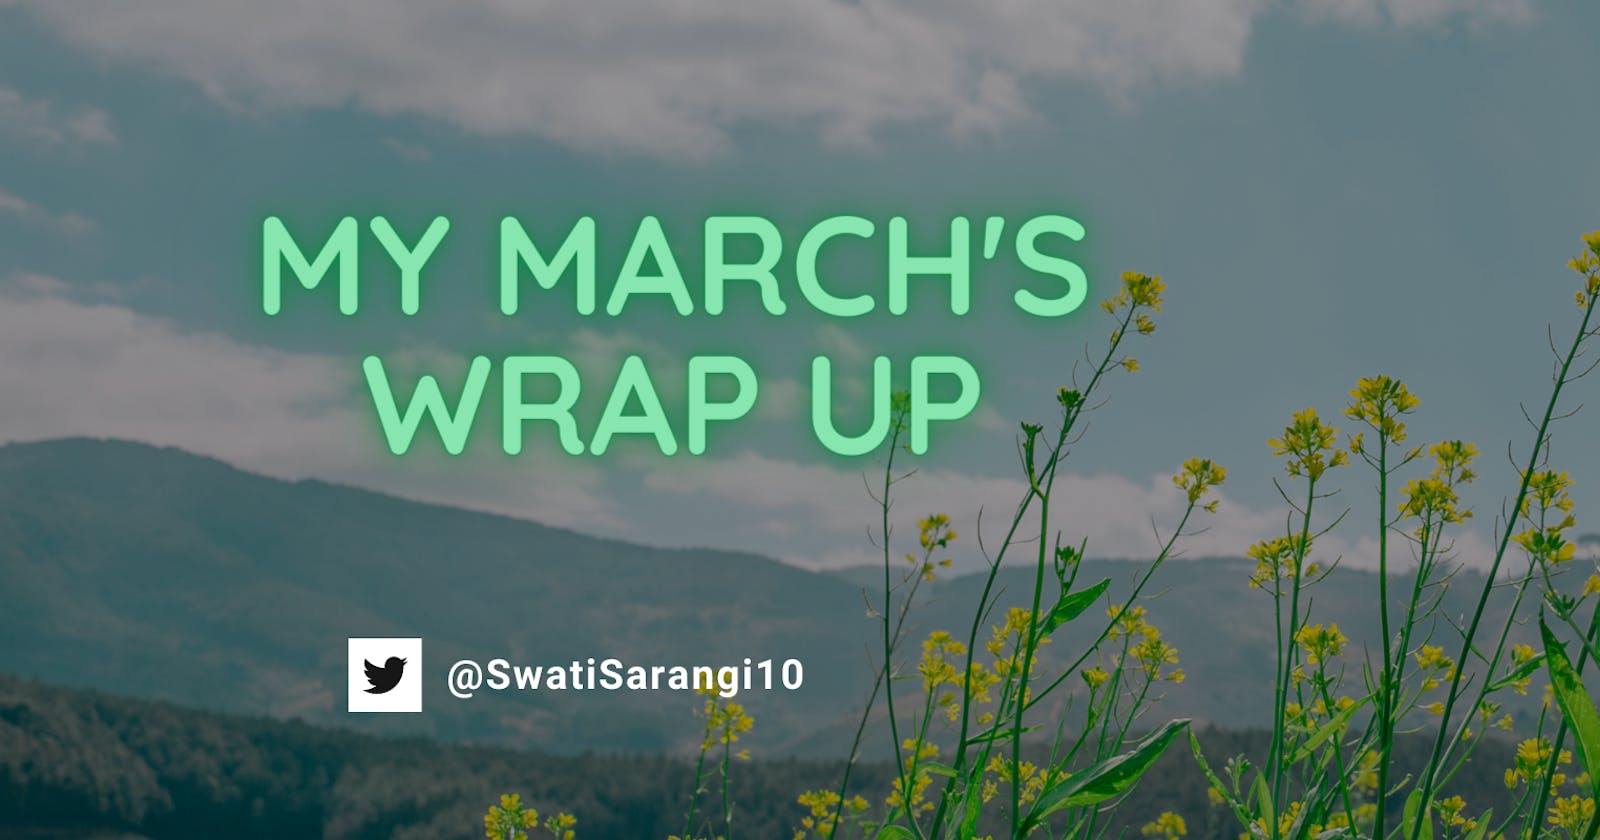 My March's Wrap Up